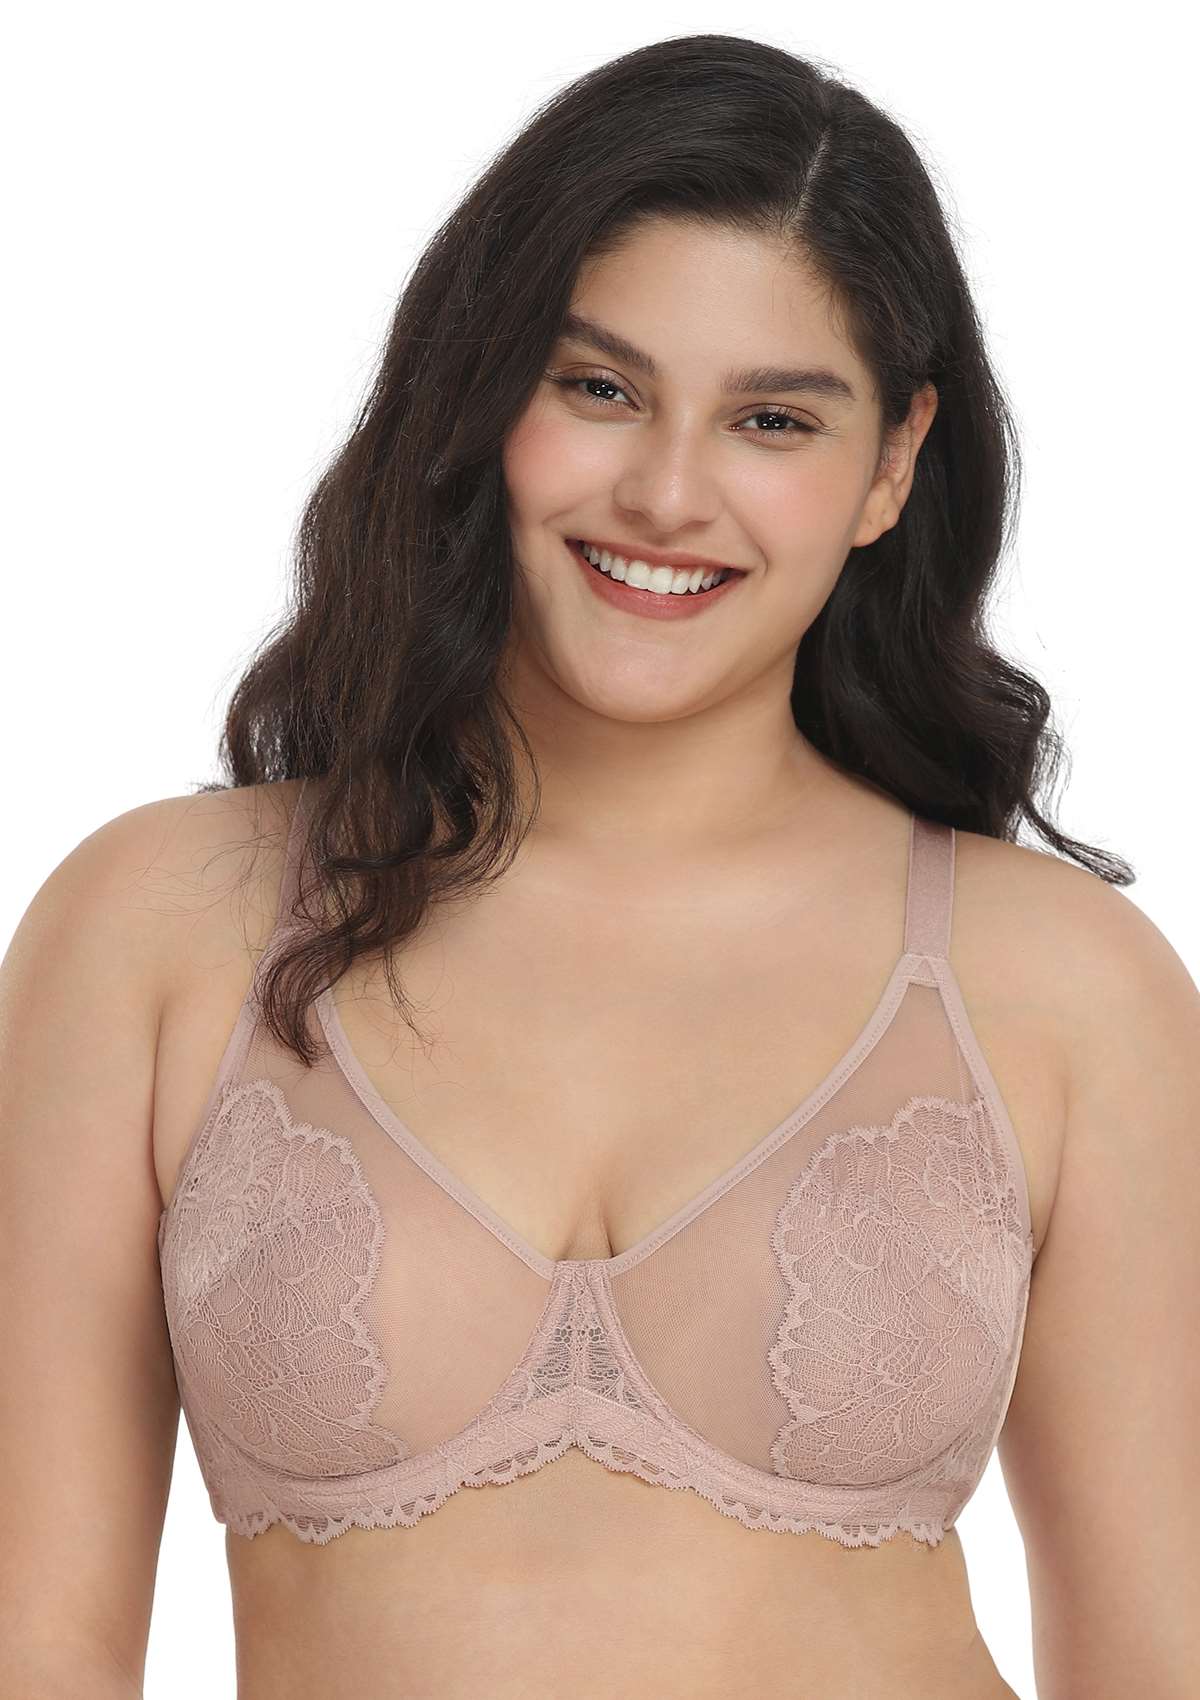 HSIA Blossom Lace Bra And Panties Set: Best Bra For Large Busts - Dark Pink / 42 / G